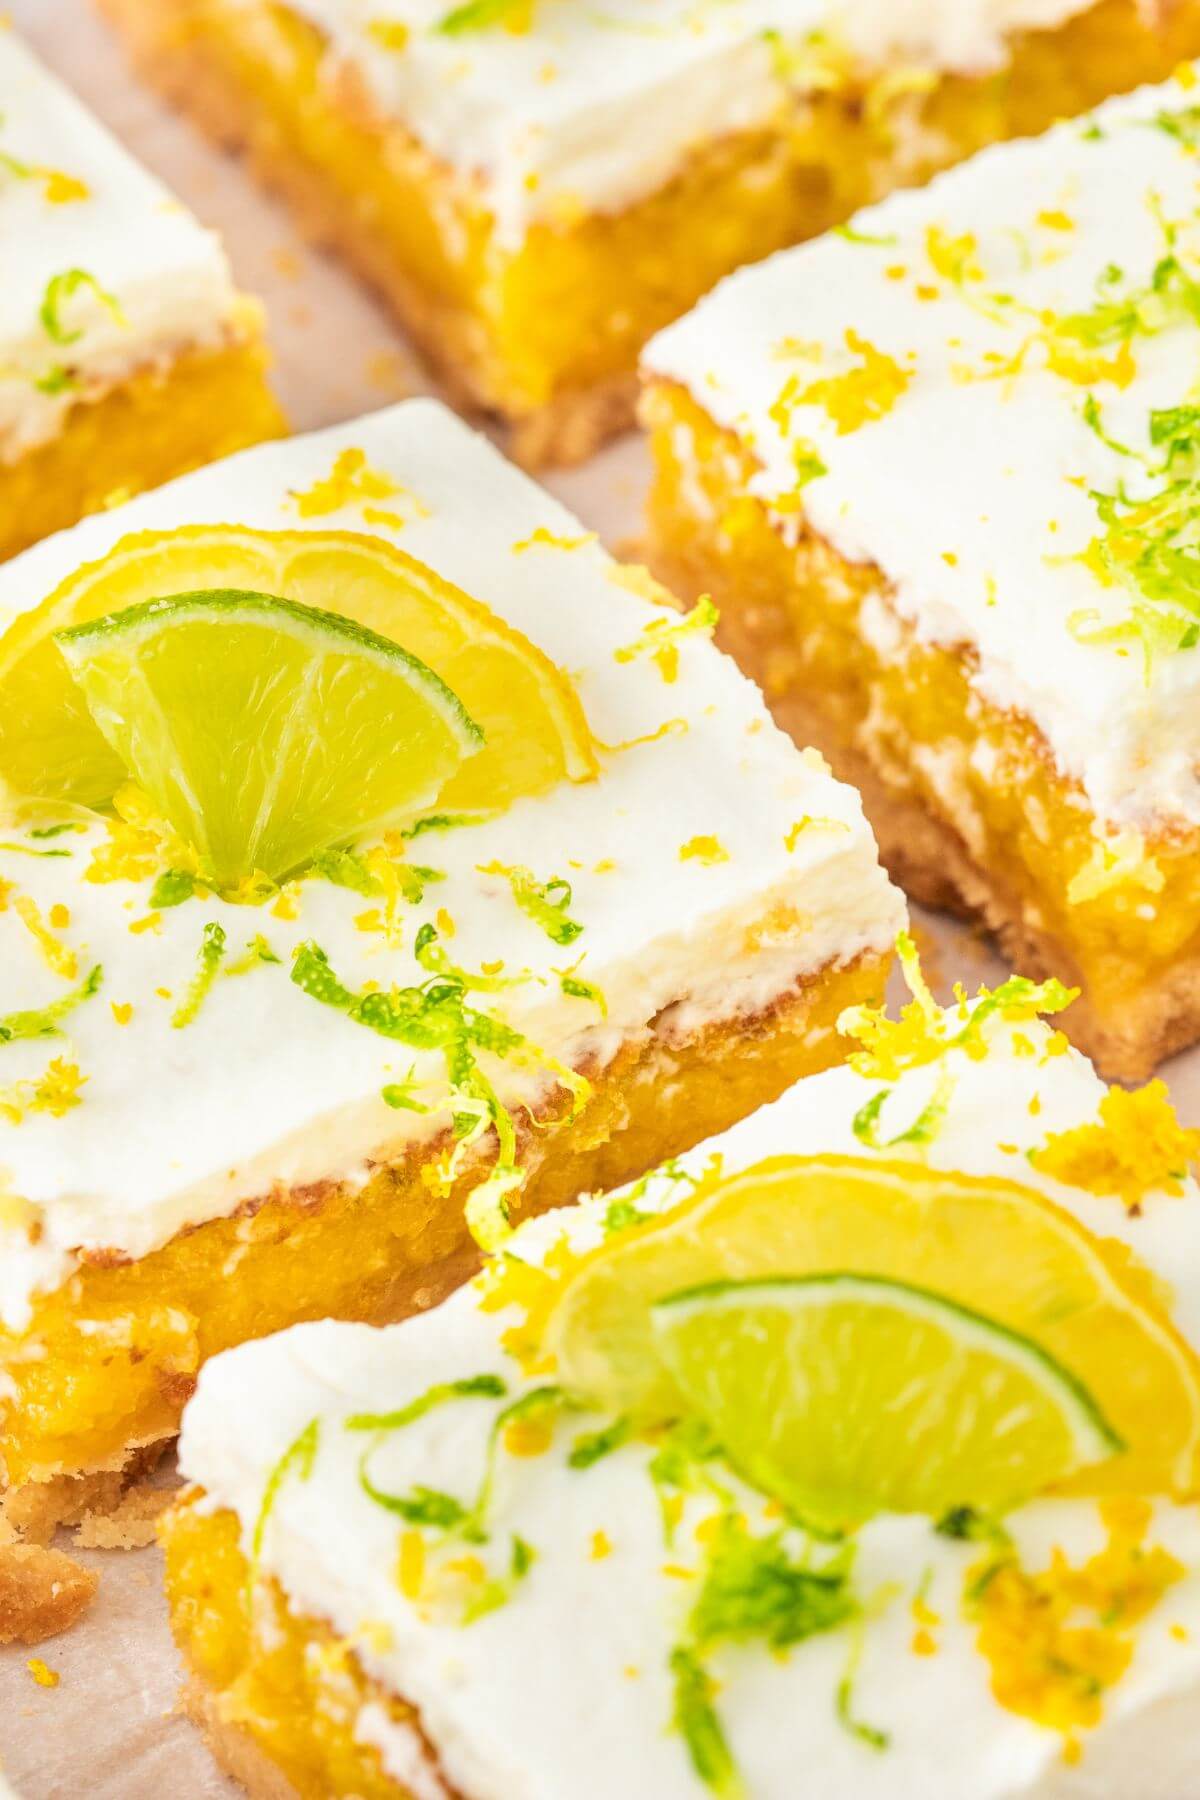 Lime and lemon thin slices and festive zest top white iced dessert squares.